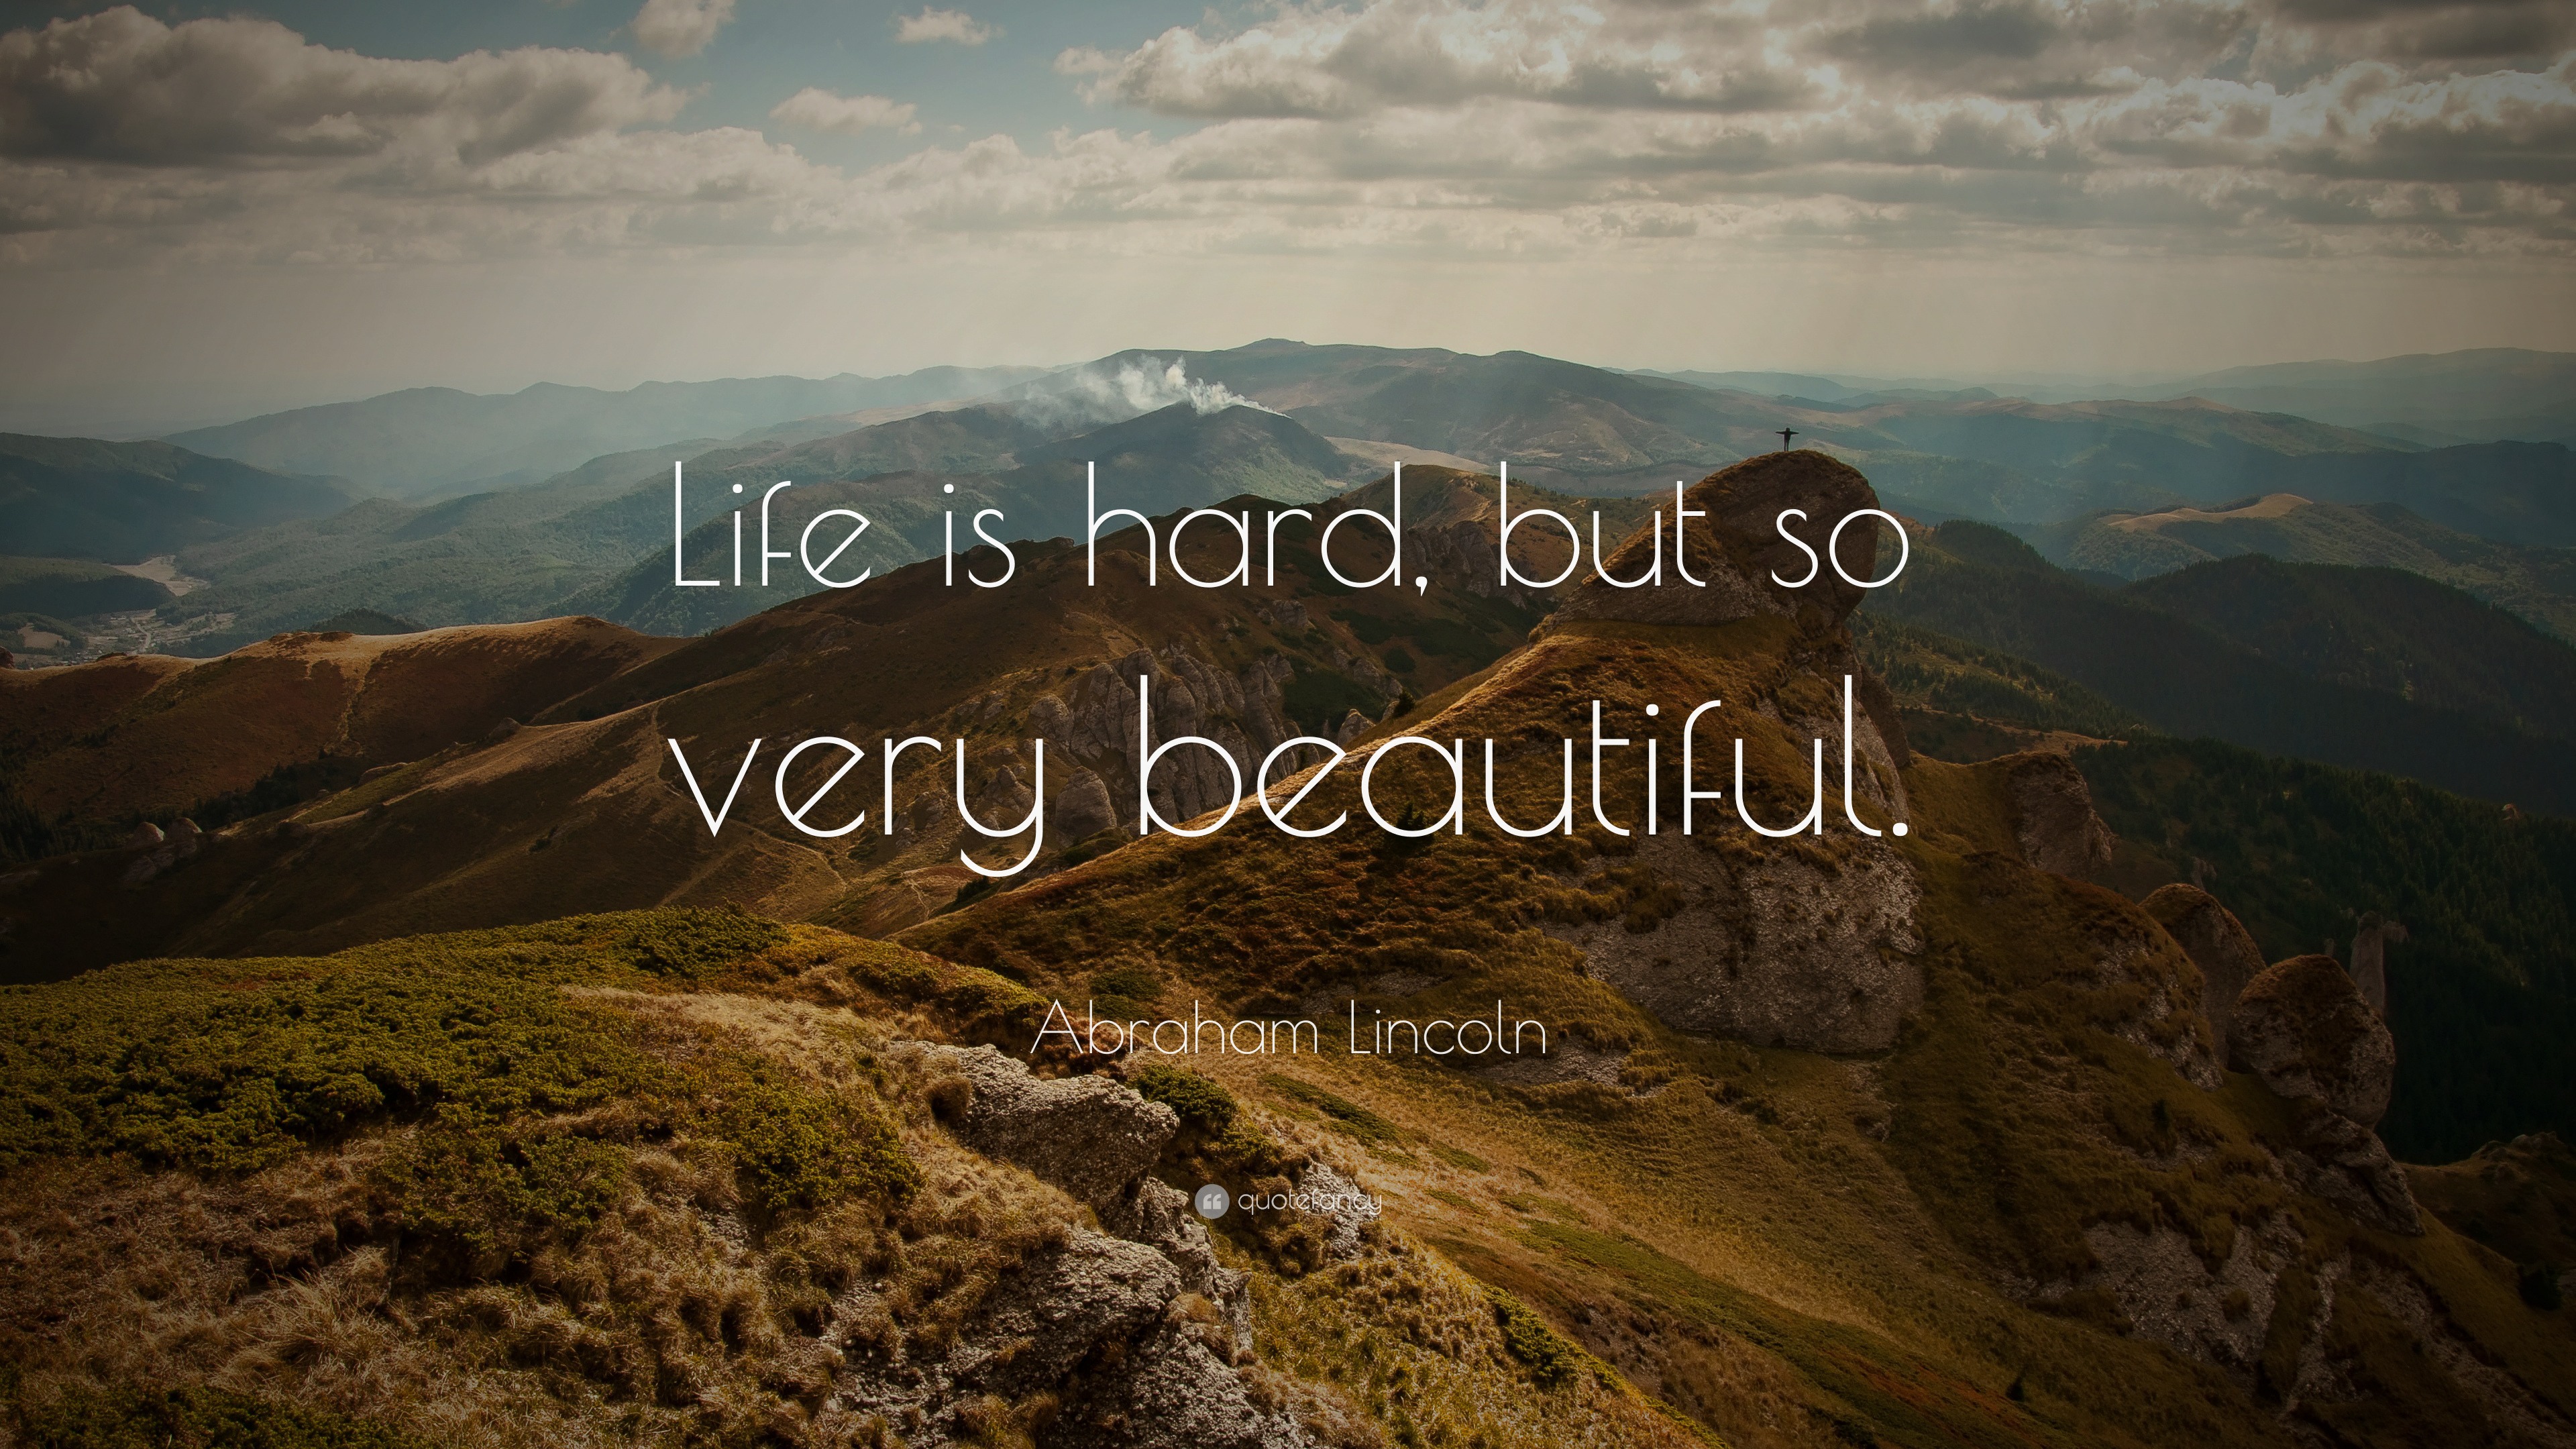 Abraham Lincoln Quote “Life is hard but so very beautiful